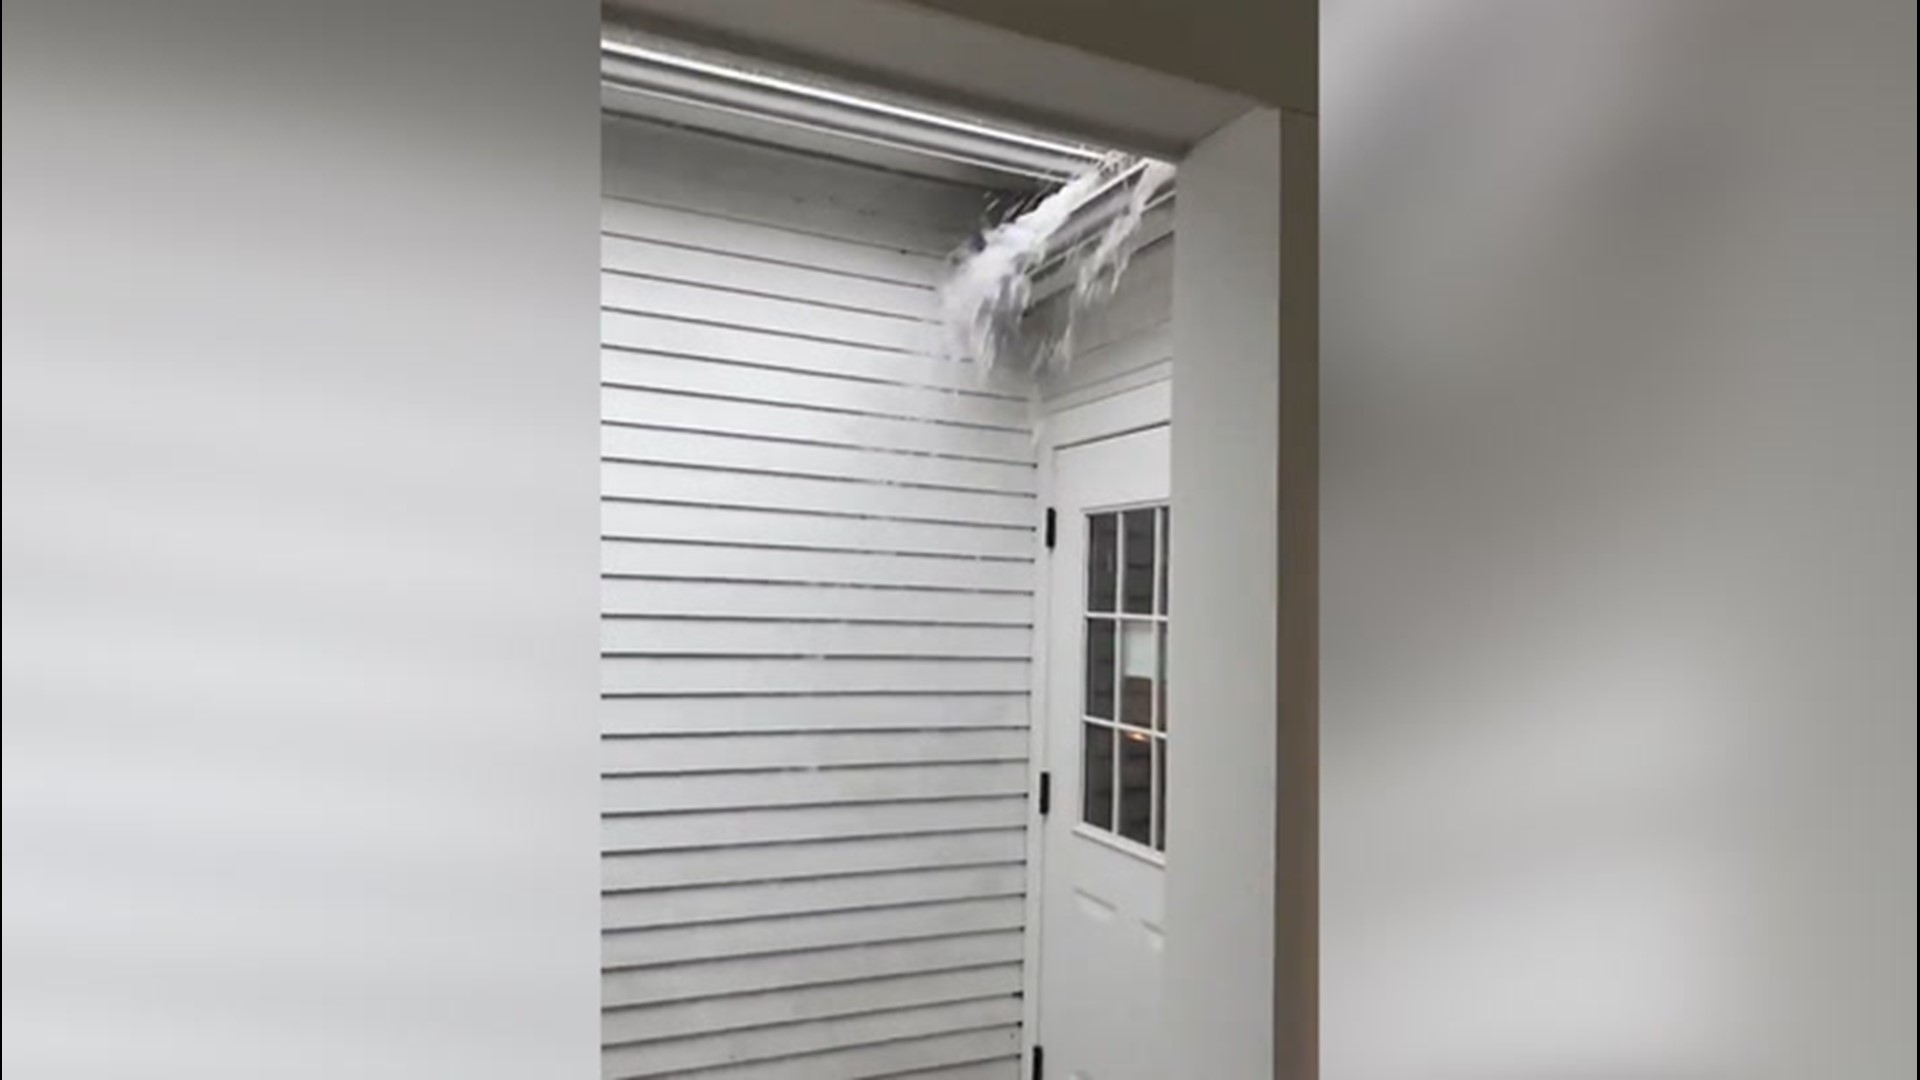 Heavy rains fell in Brewster, Massachusetts, on Nov. 23. A resident captured her gutters flooding on video and reported flickering lights in her neighborhood.